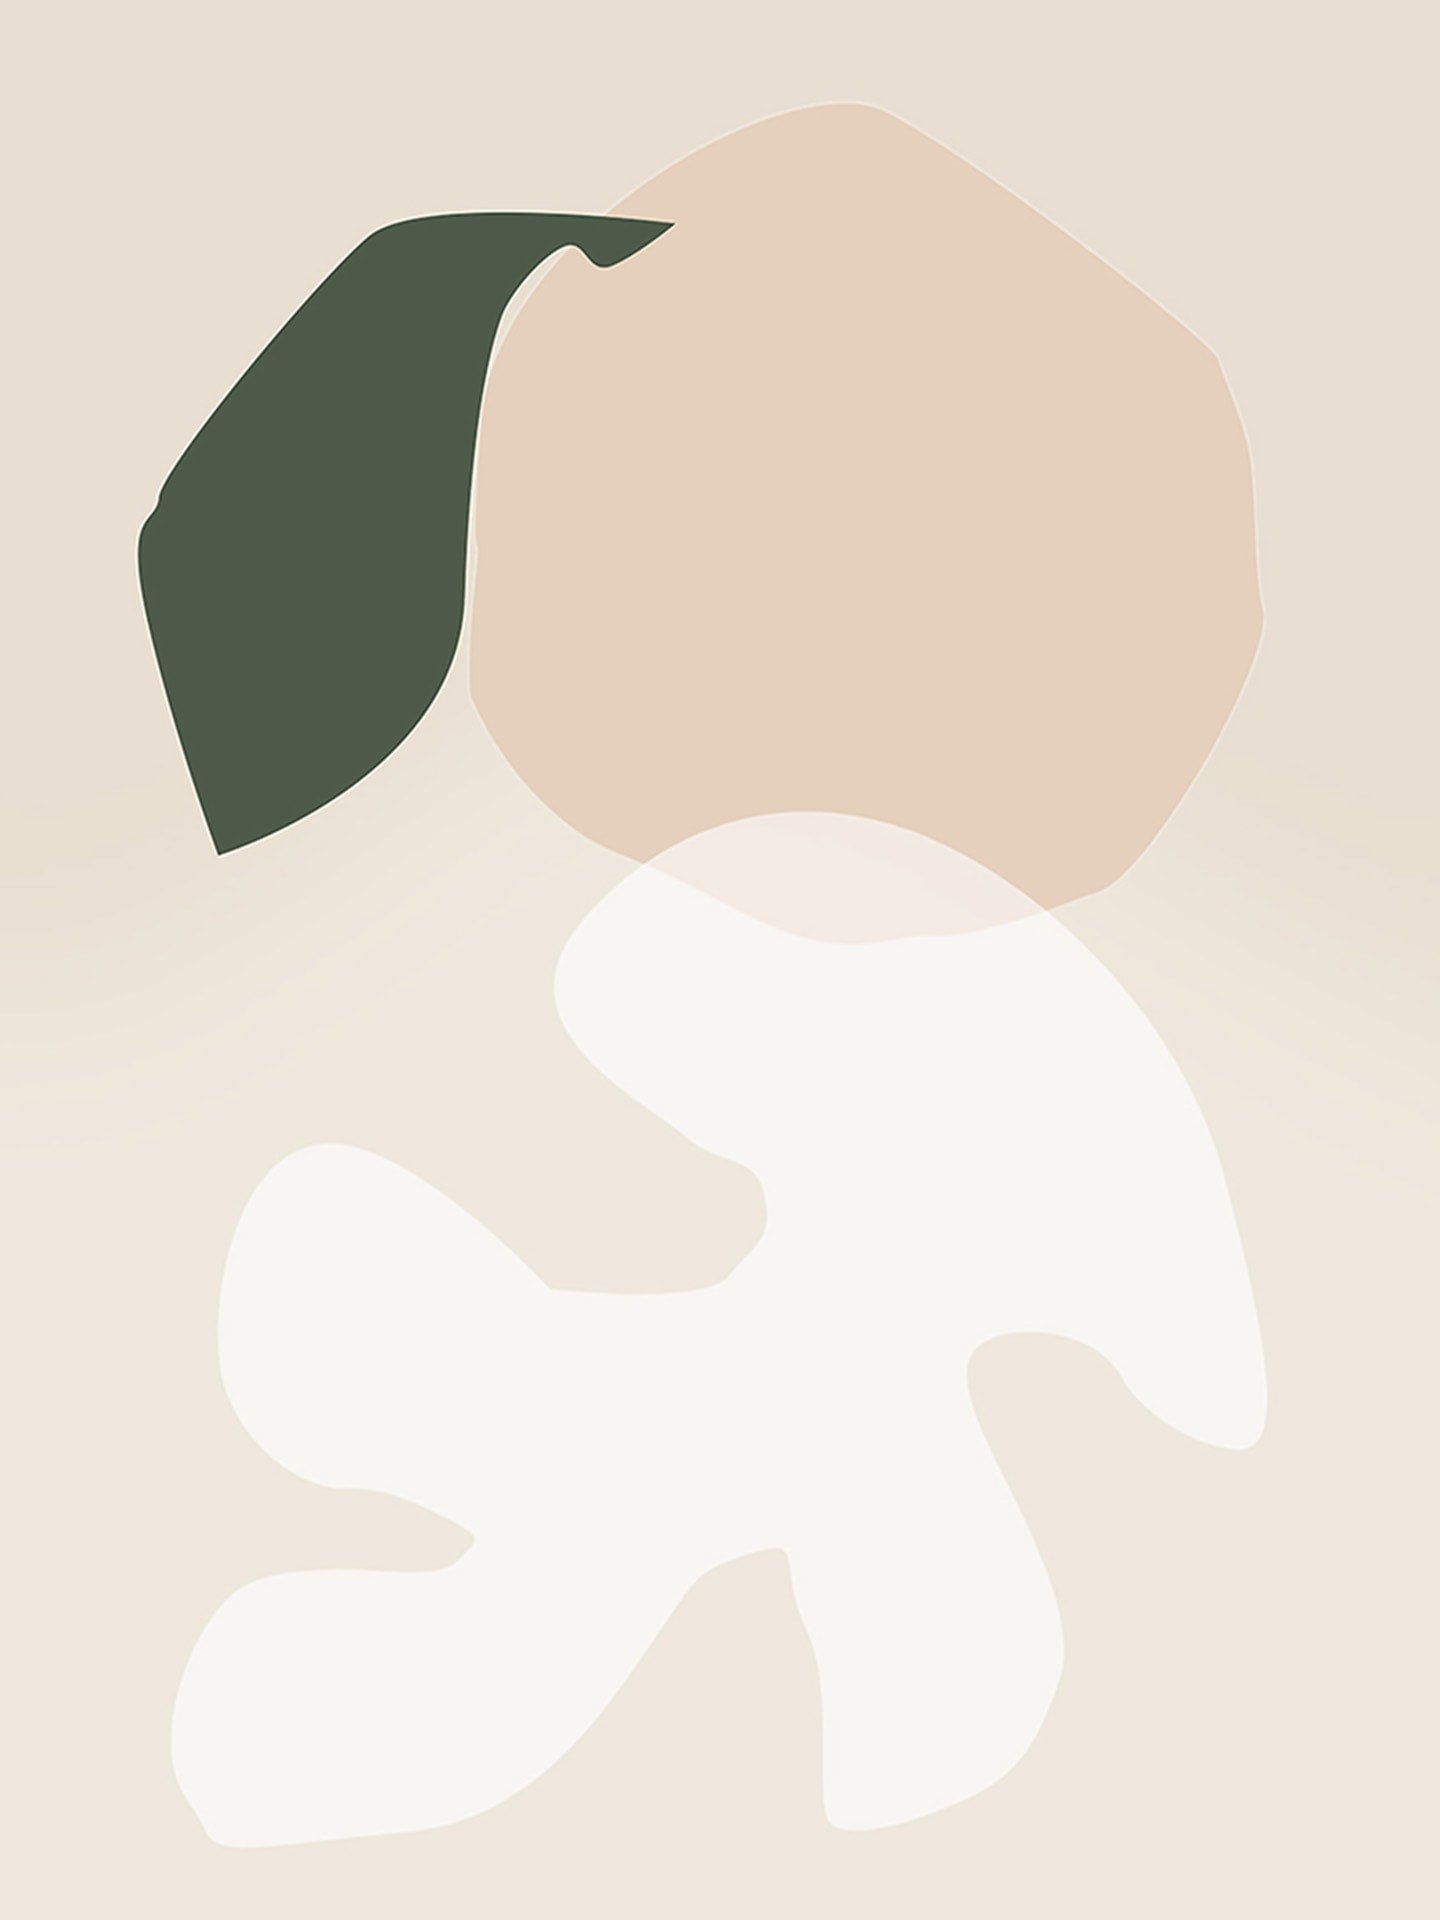 An illustration of a peach and leaf on a beige background.